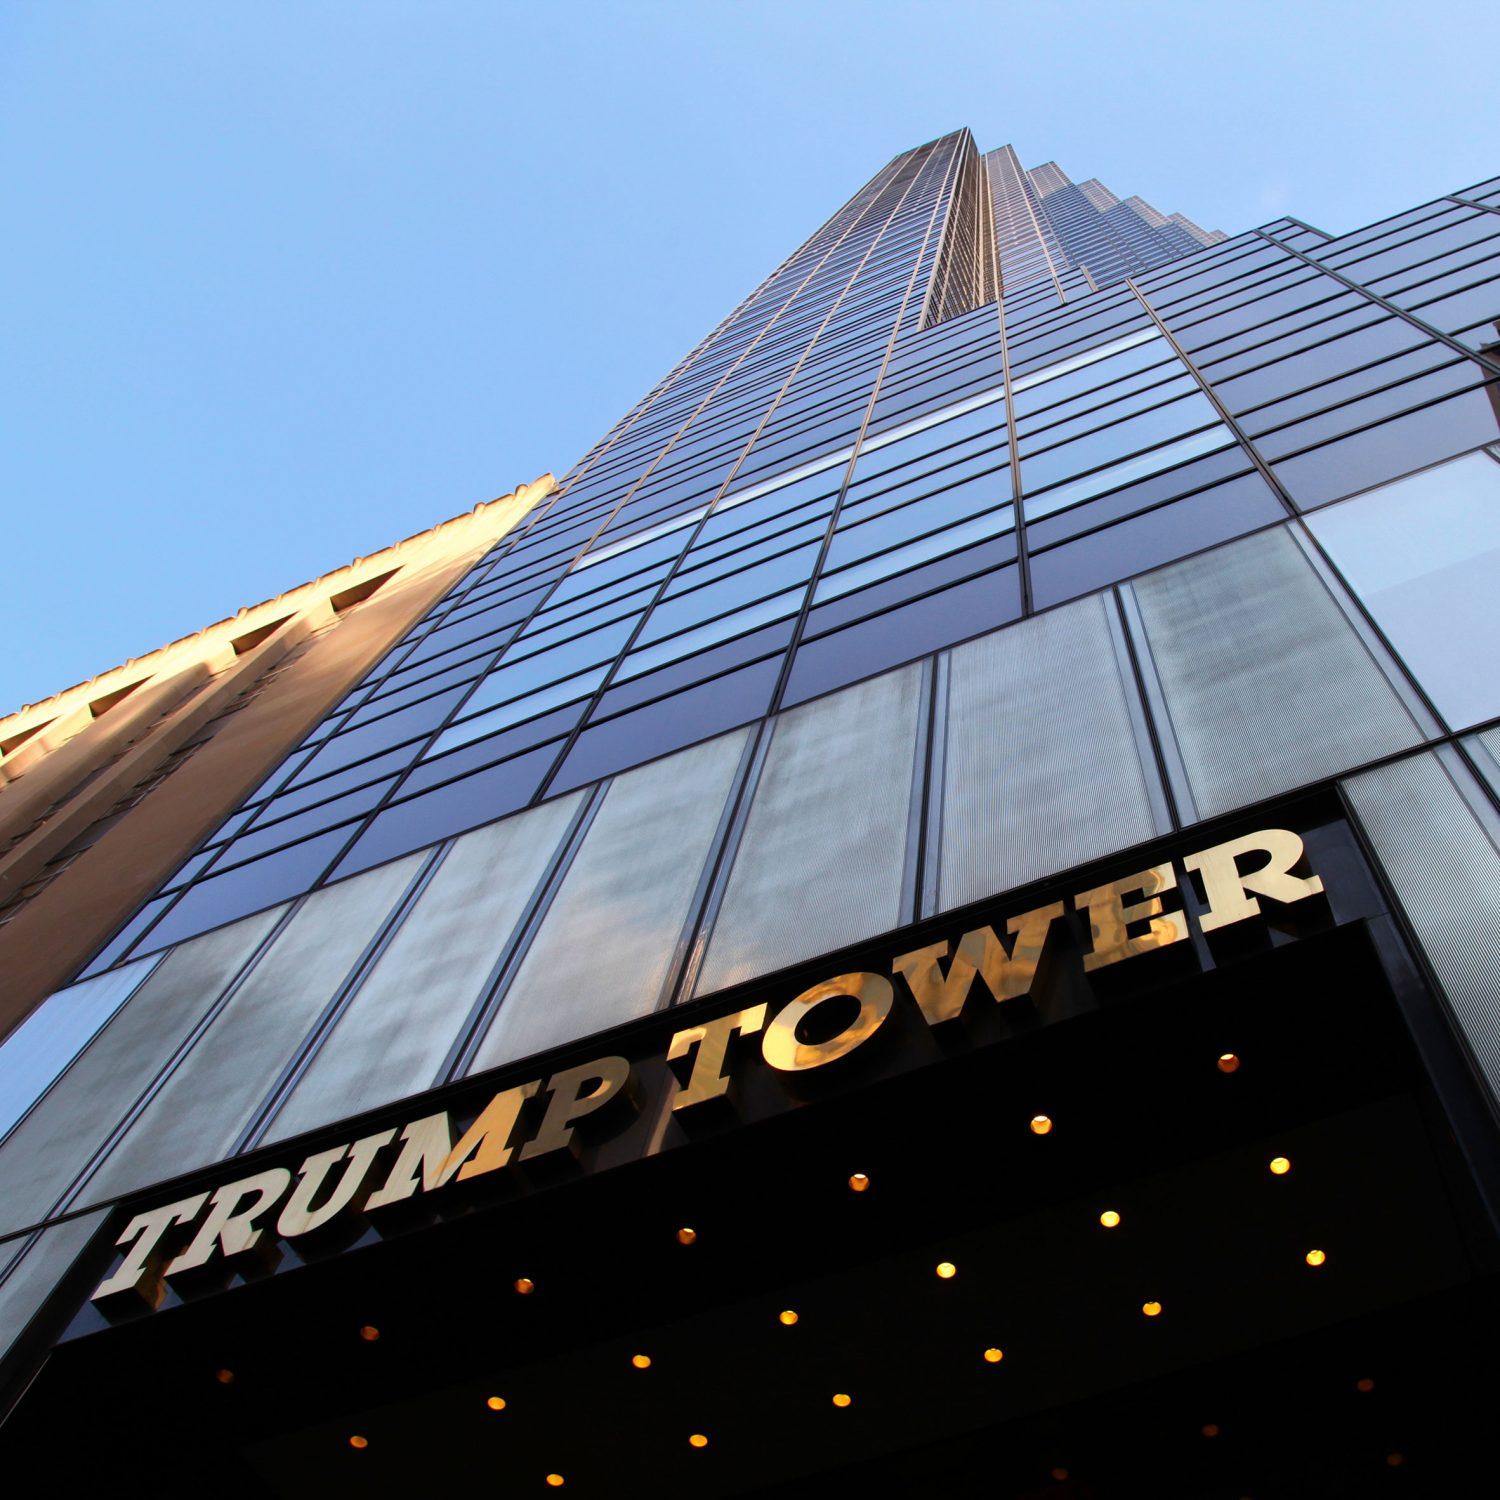 Collection 91+ Pictures Pictures Of Trump Tower In New York Excellent